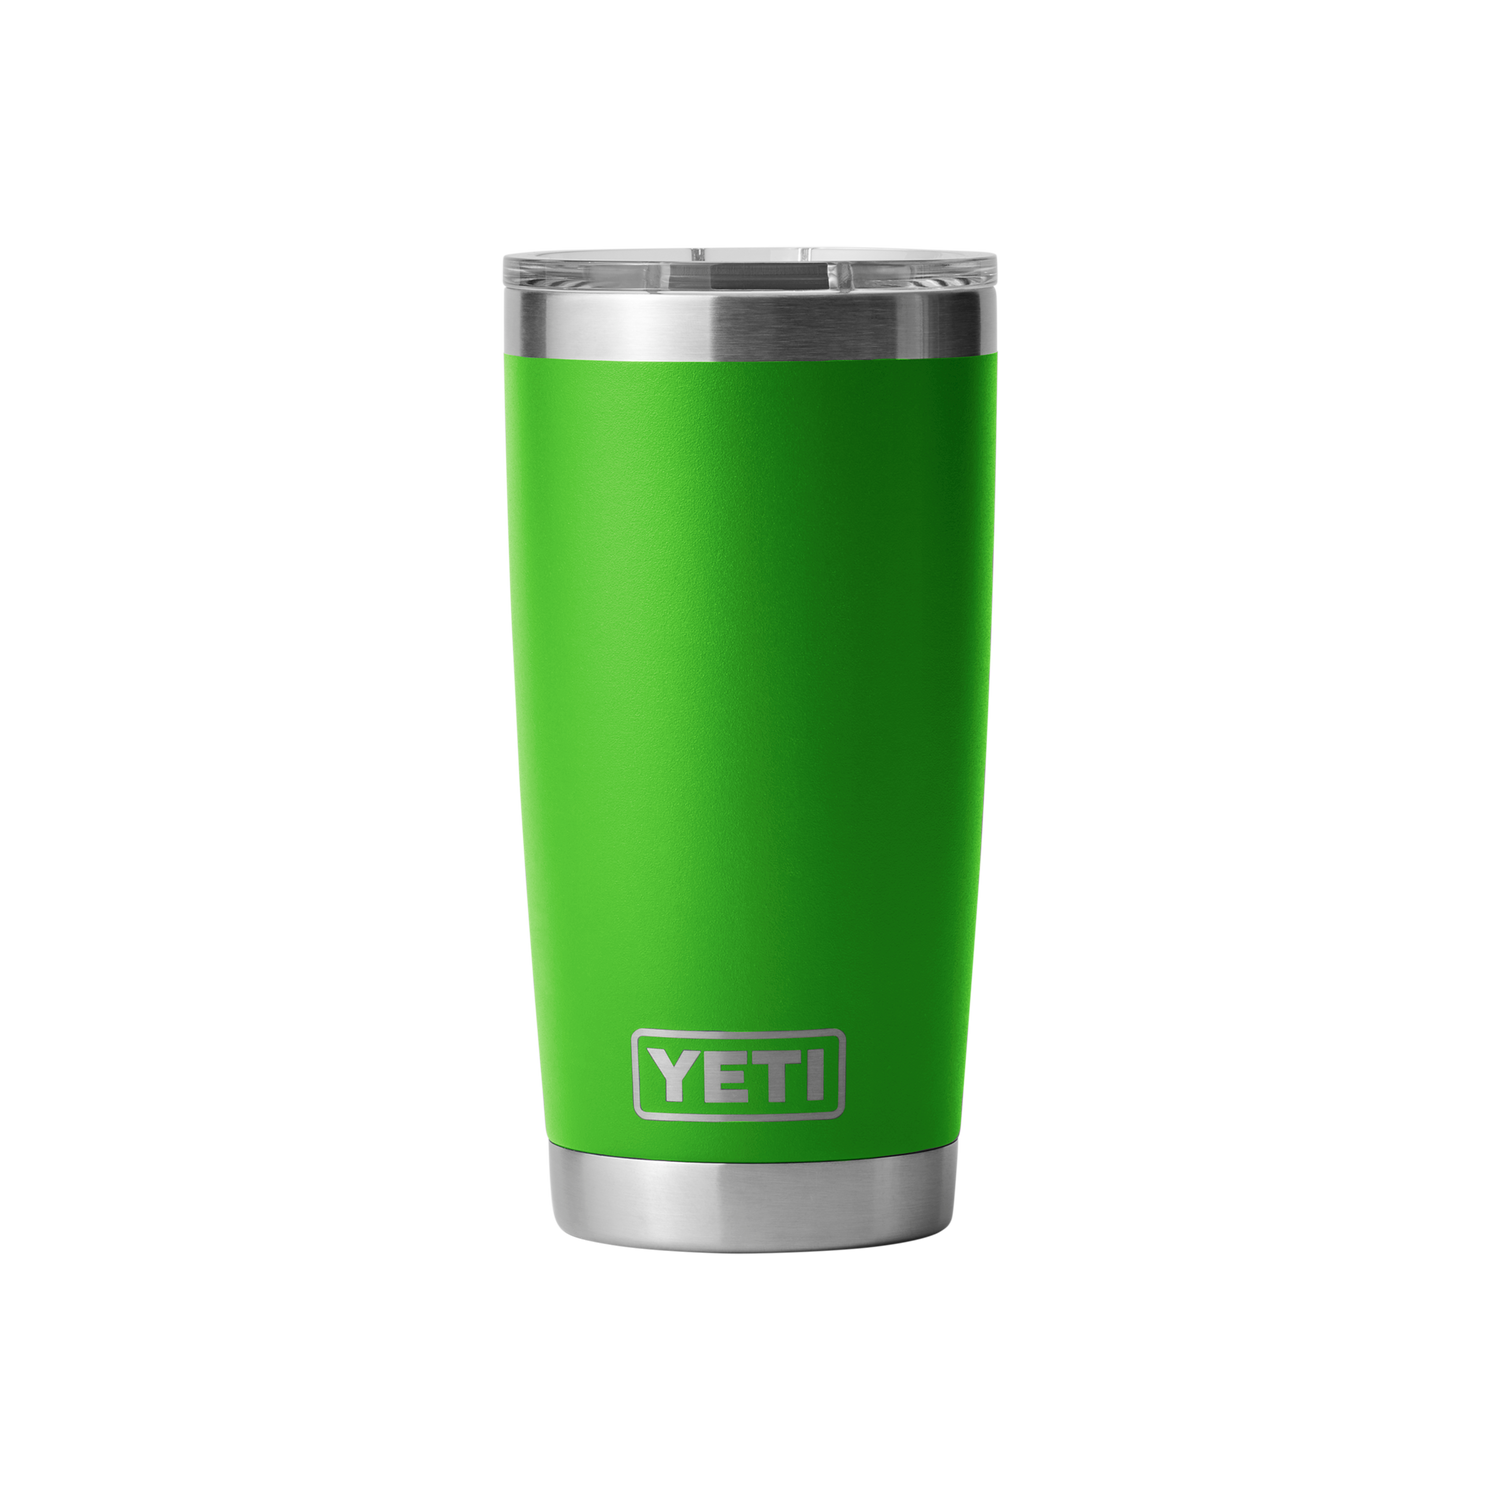 holographic rare mini yeti cup with handle｜TikTok Search